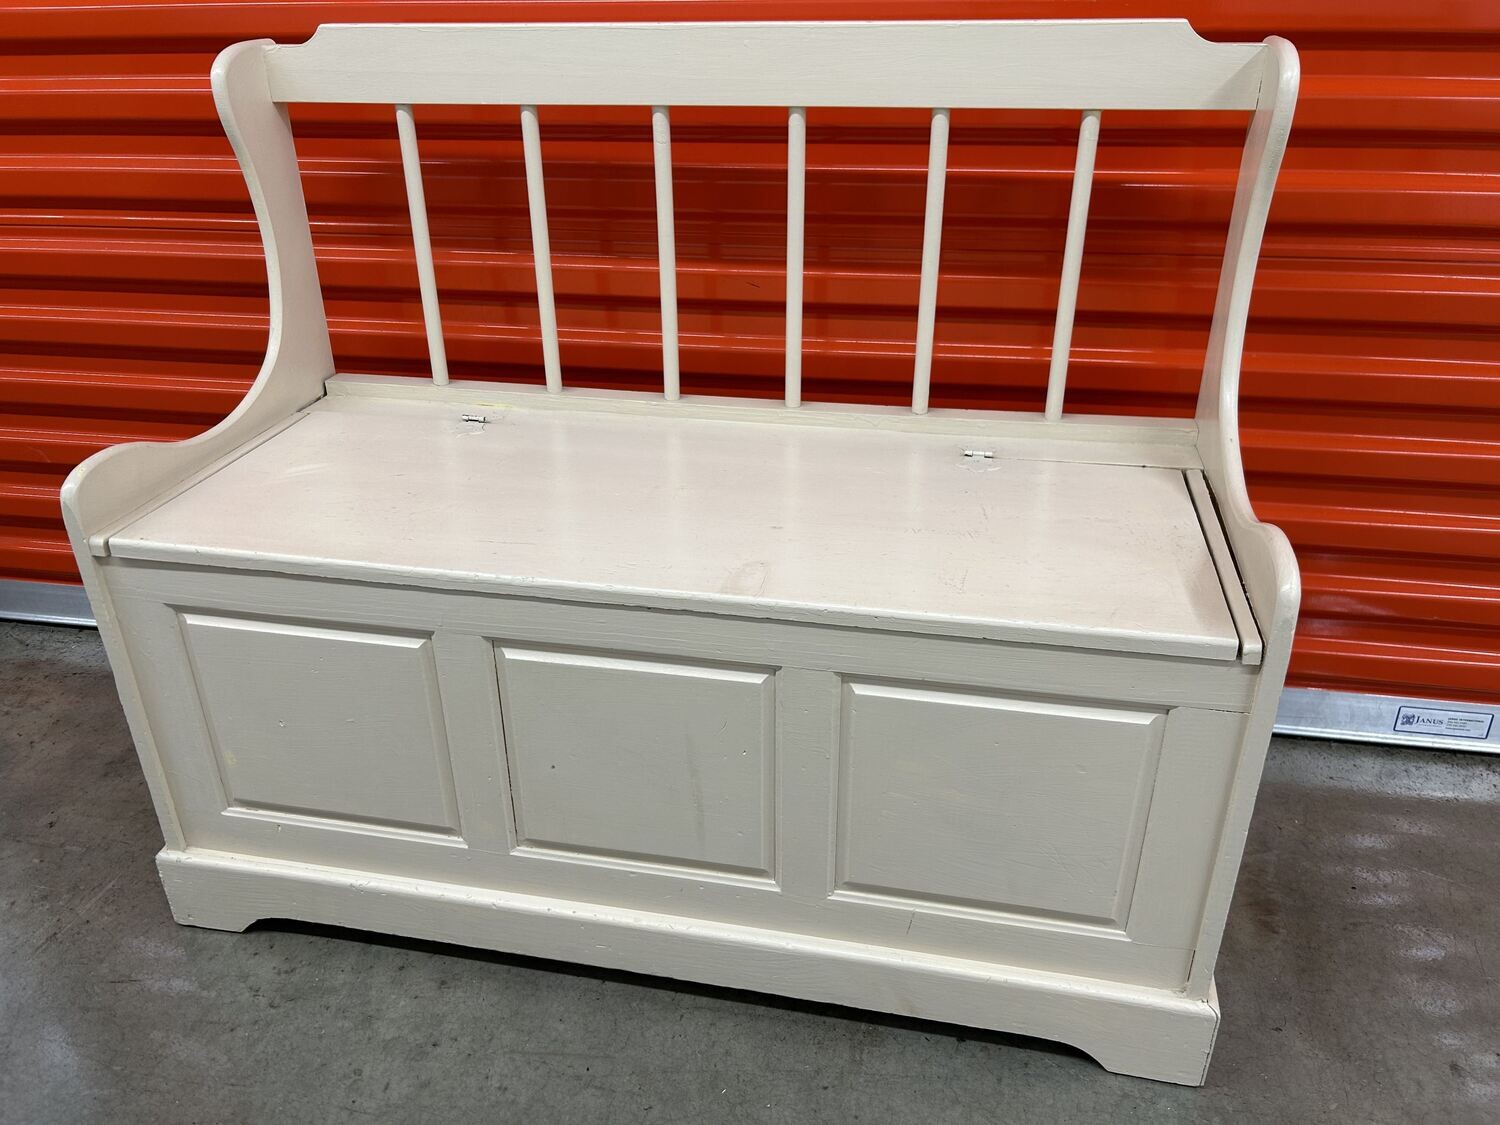 Toy / Storage Bench, painted pine #2213 ** 1 wk. to sell, full price